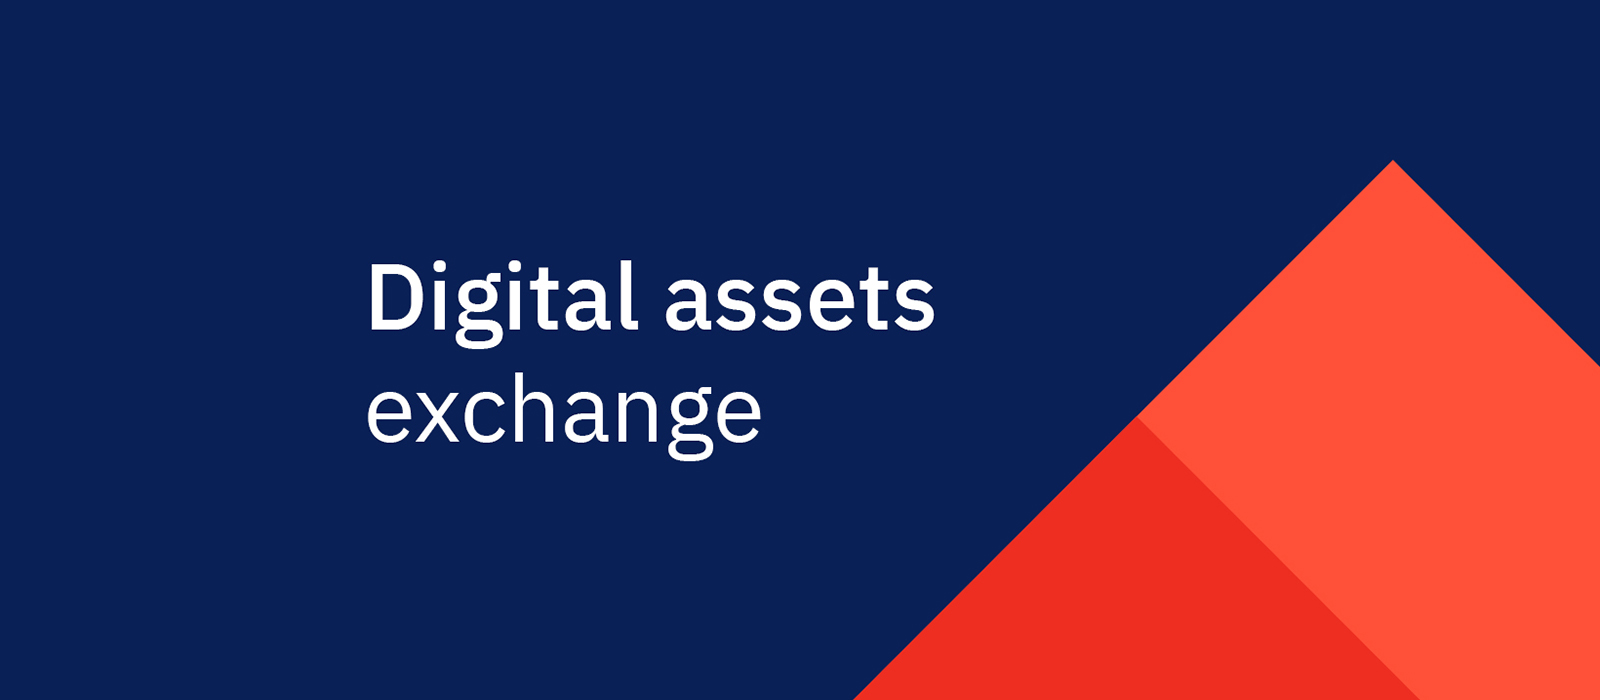 Blocktrade is more than a classic crypto exchange: we are building a complete ecosystem around digital assets, which provides our users with much more than just access to trading tools.